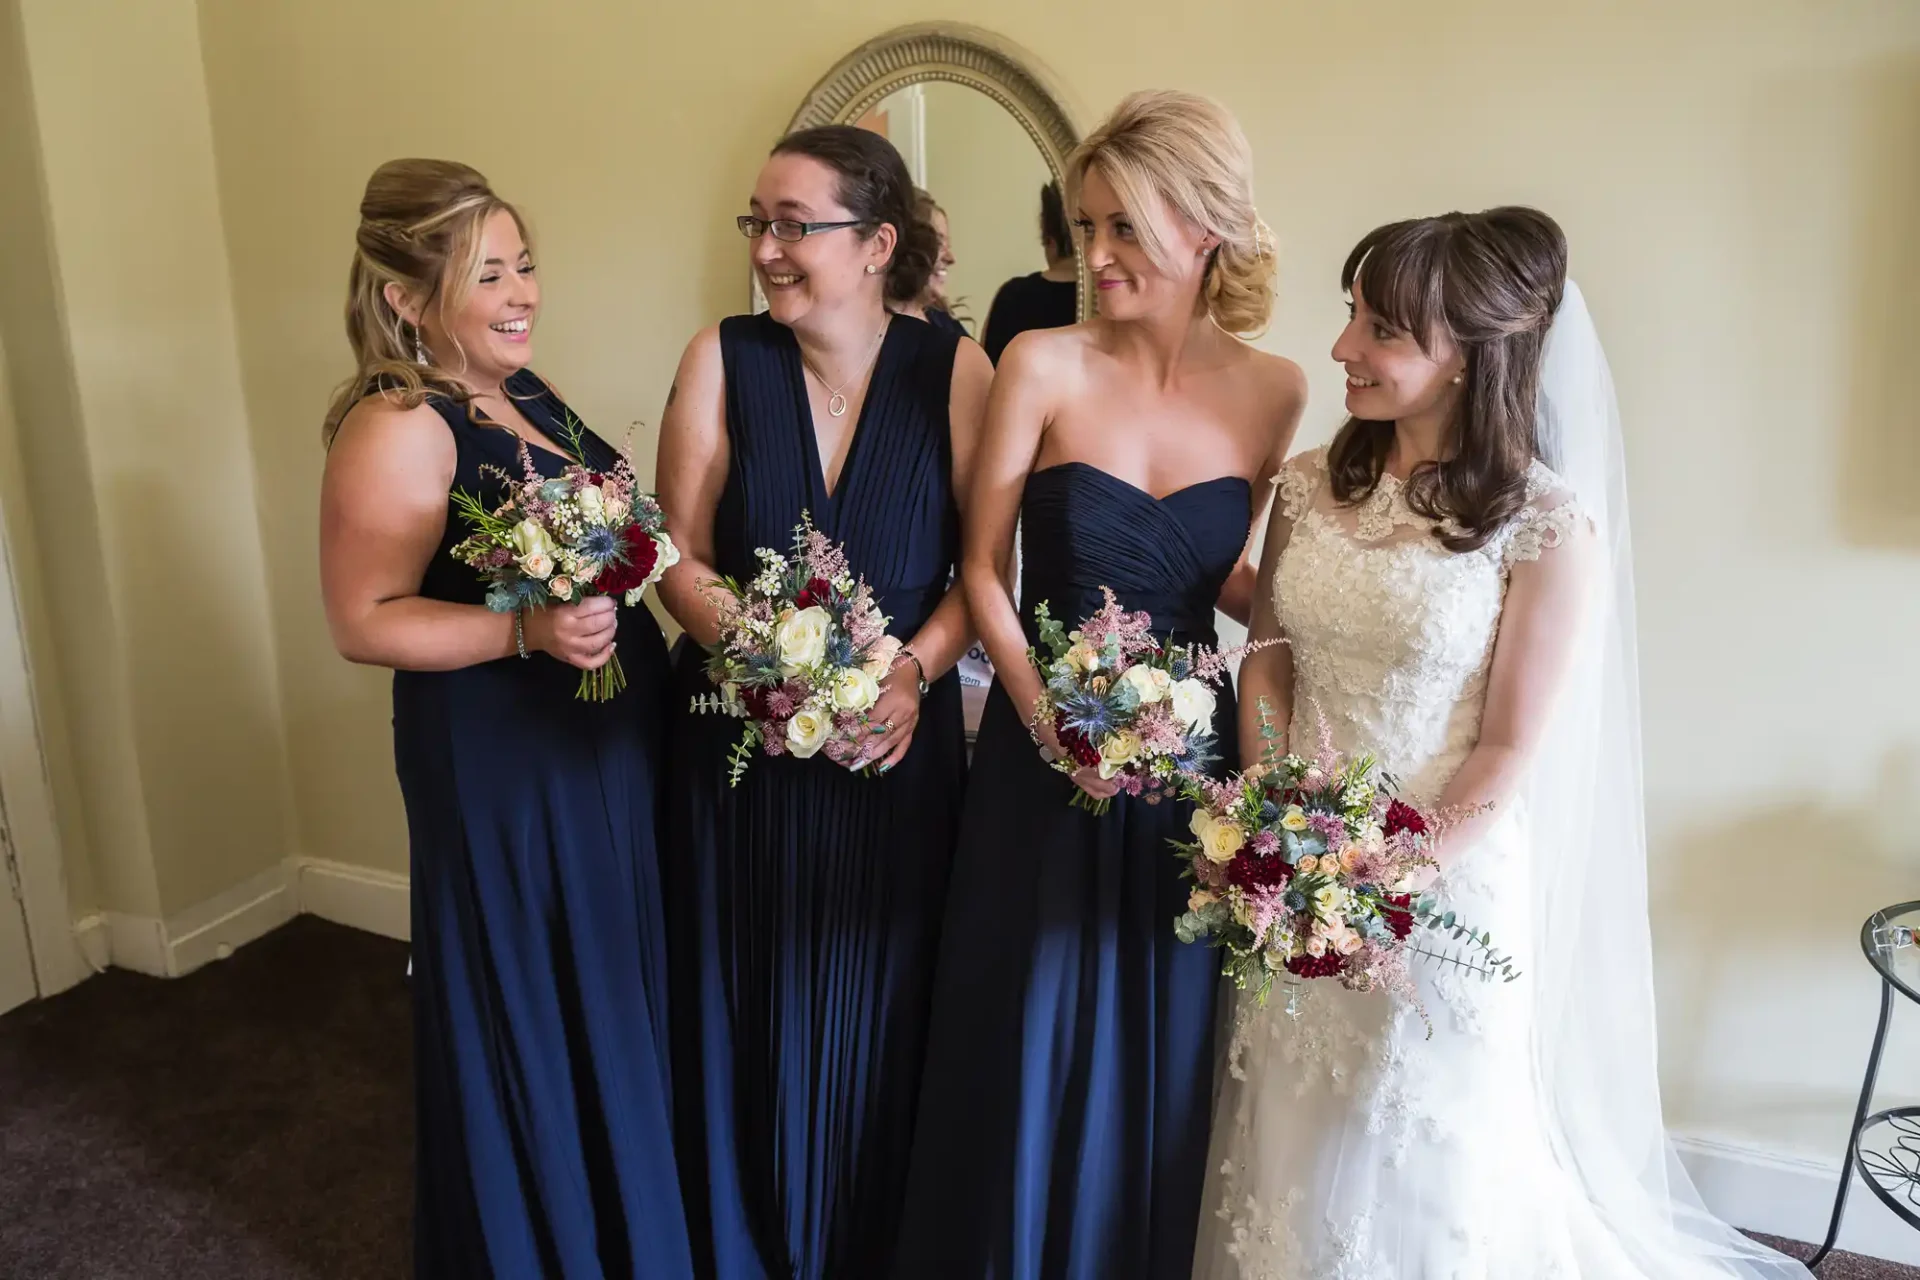 Four women in formal wear, one in a white wedding dress and three in navy dresses, holding bouquets and smiling indoors.